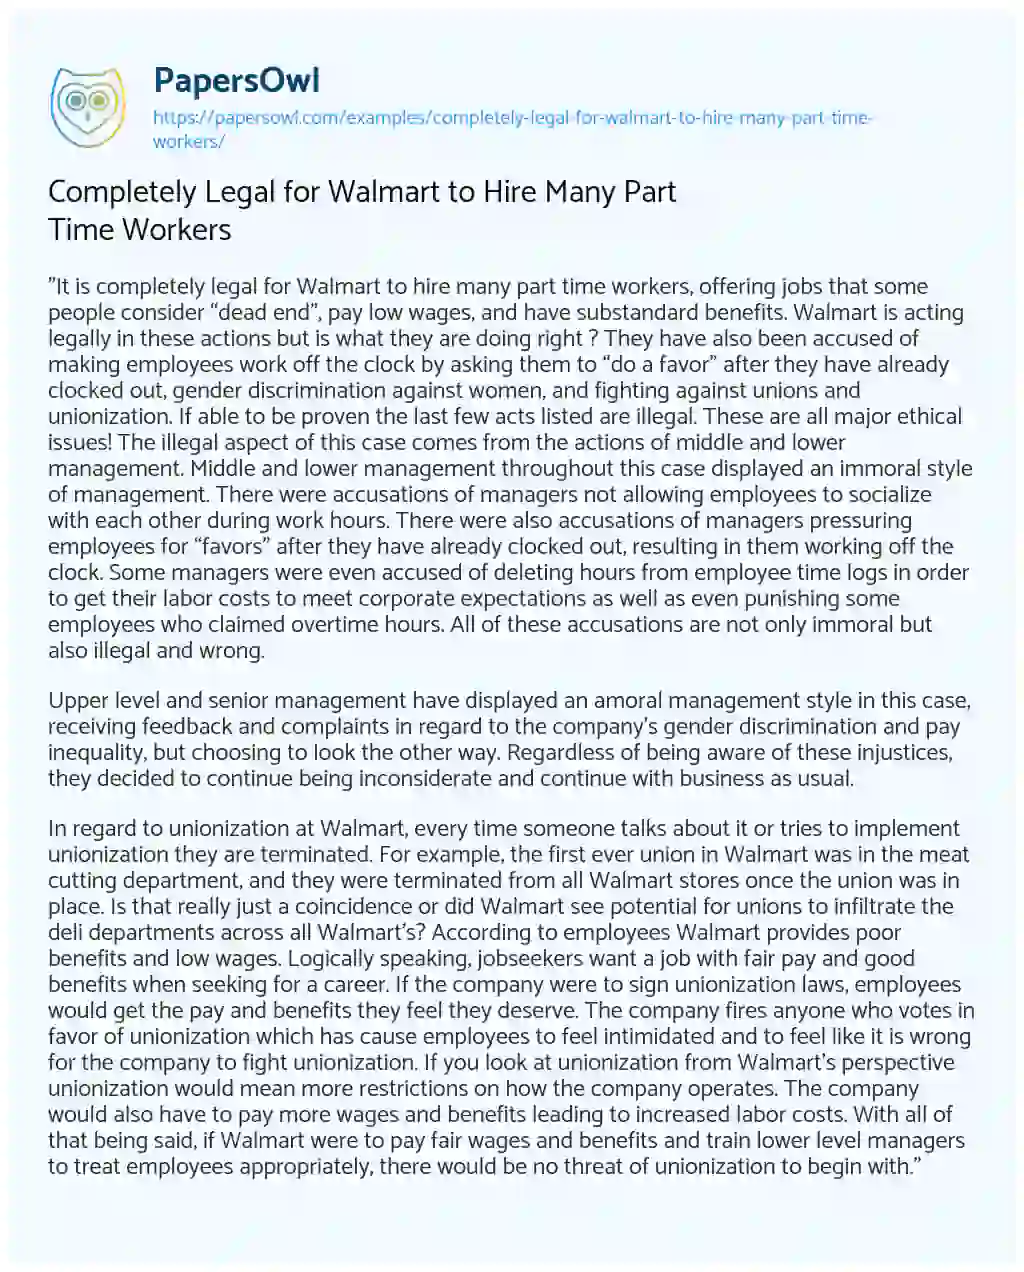 Essay on Completely Legal for Walmart to Hire Many Part Time Workers